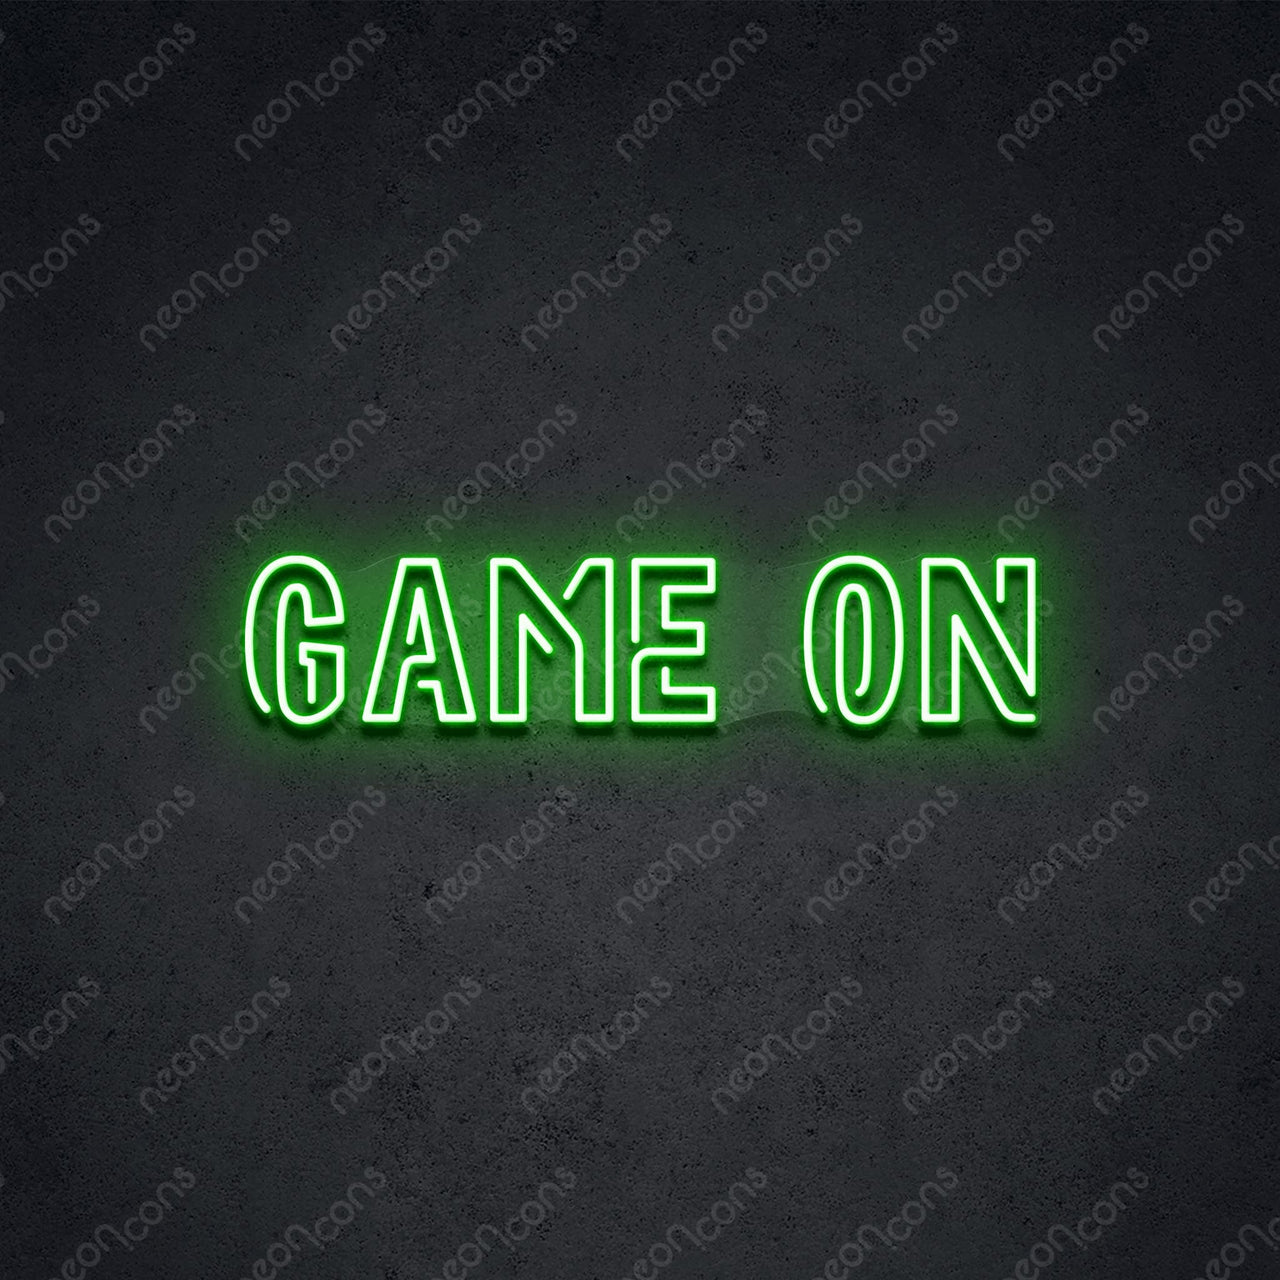 "Game On" Neon Sign 2ft x 0.55ft / Green / LED Neon by Neon Icons